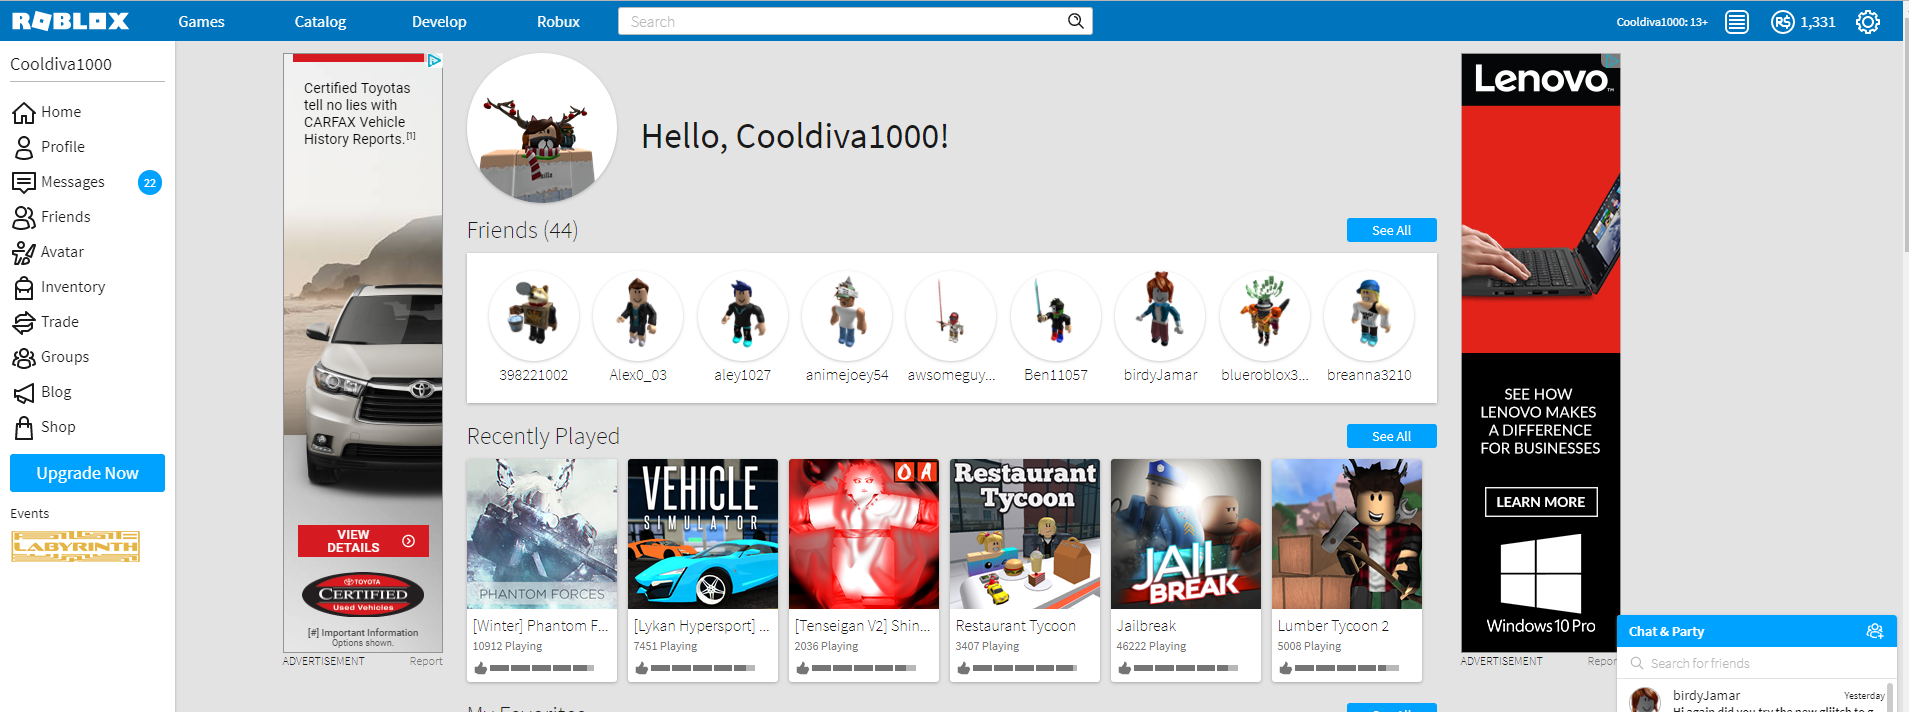 Selling High End 2009 2009 Roblox Female Account Playerup Accounts Marketplace Player 2 Player Secure Platform - selling average 2014 roblox 2014 account boy girl